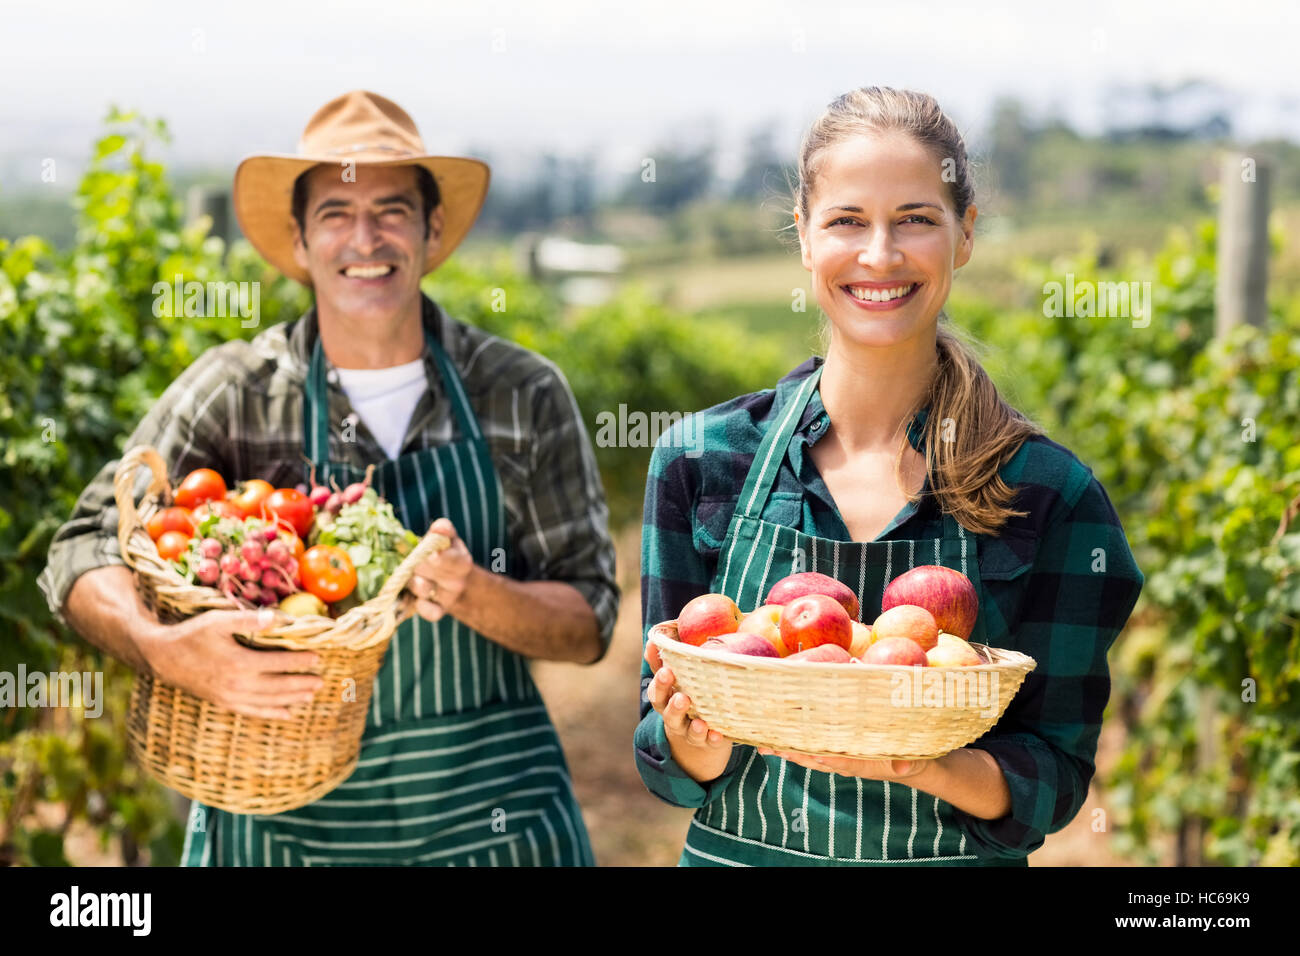 Portrait of happy farmer couple holding baskets of vegetables and fruits Stock Photo